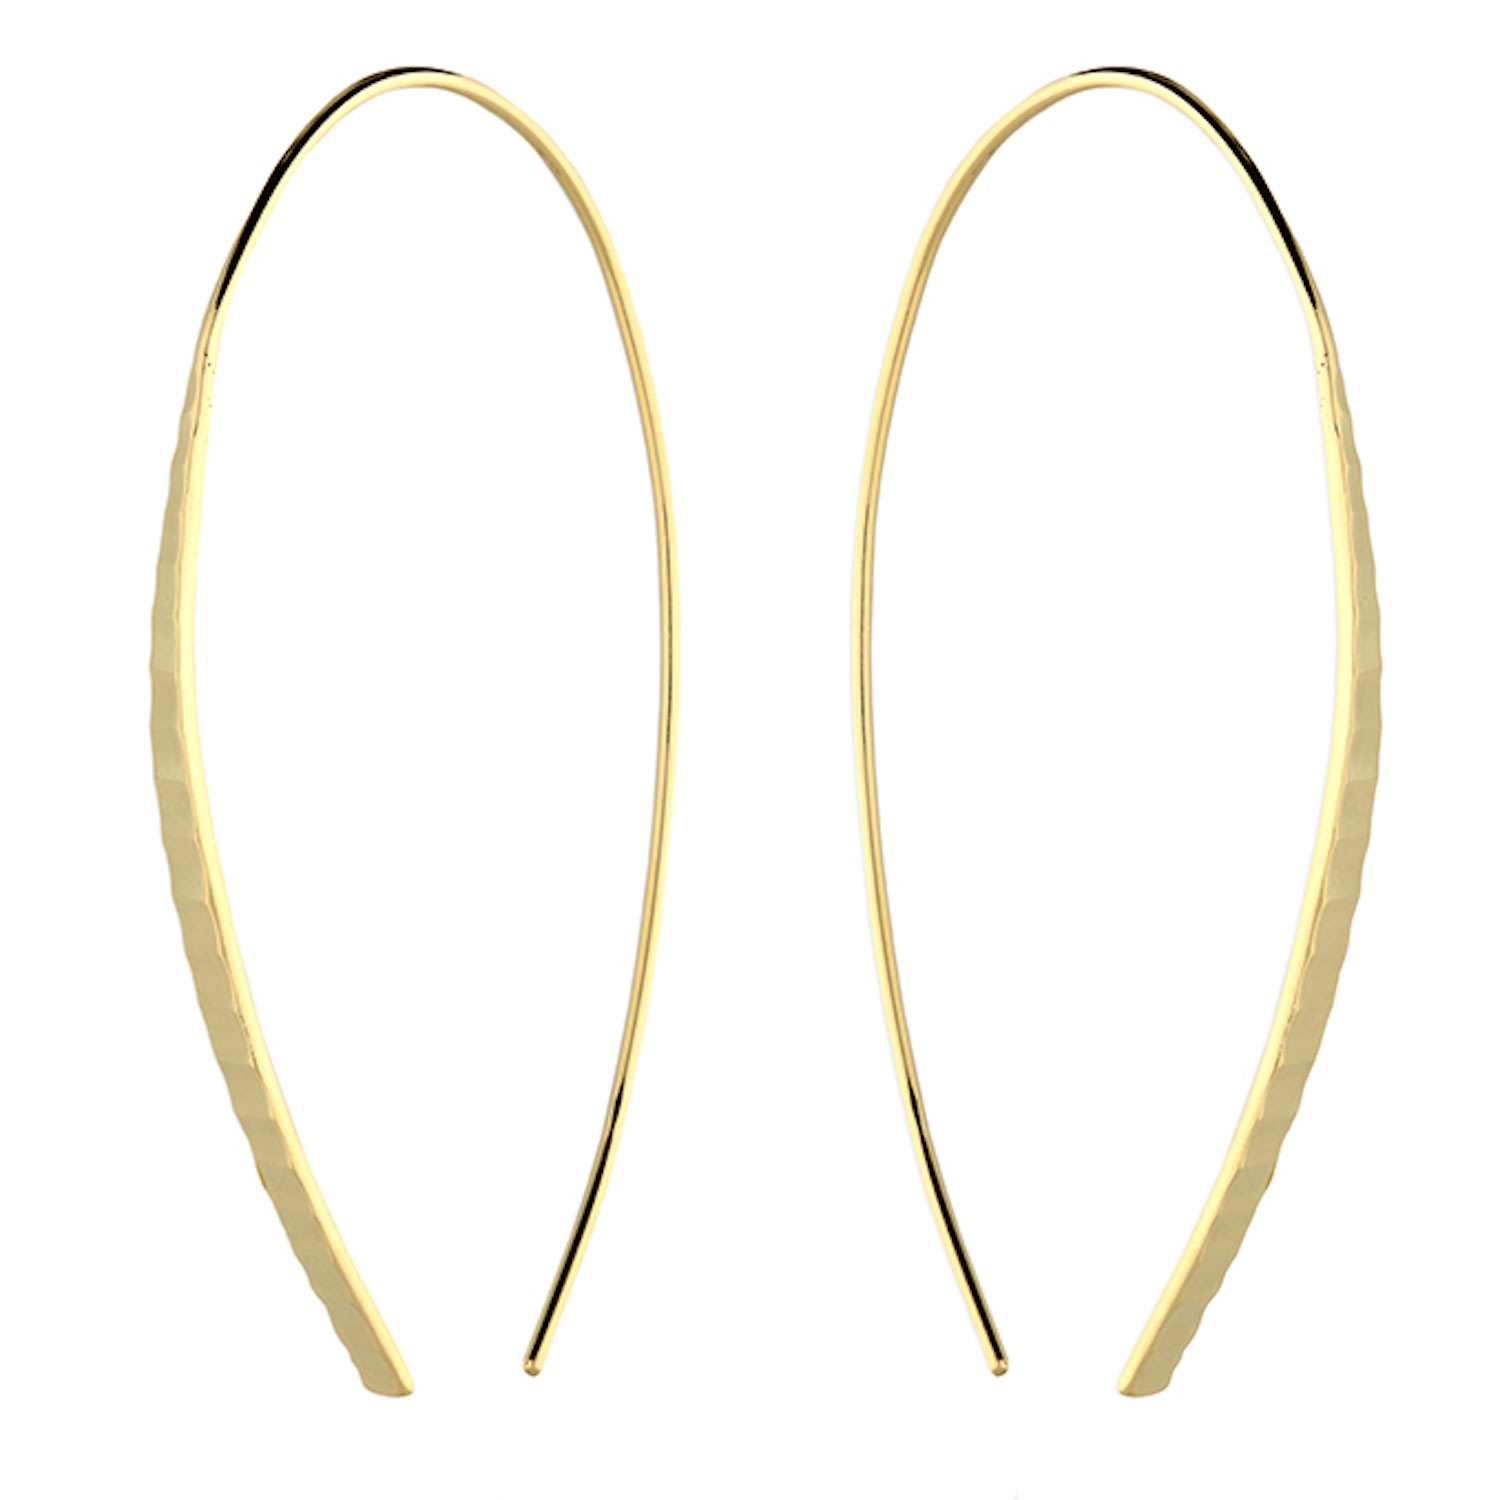 Kaizarin Women's Silver / White / Gold Yellow Gold-plated Diamond Cut Tapered Bar Pull Through Earring